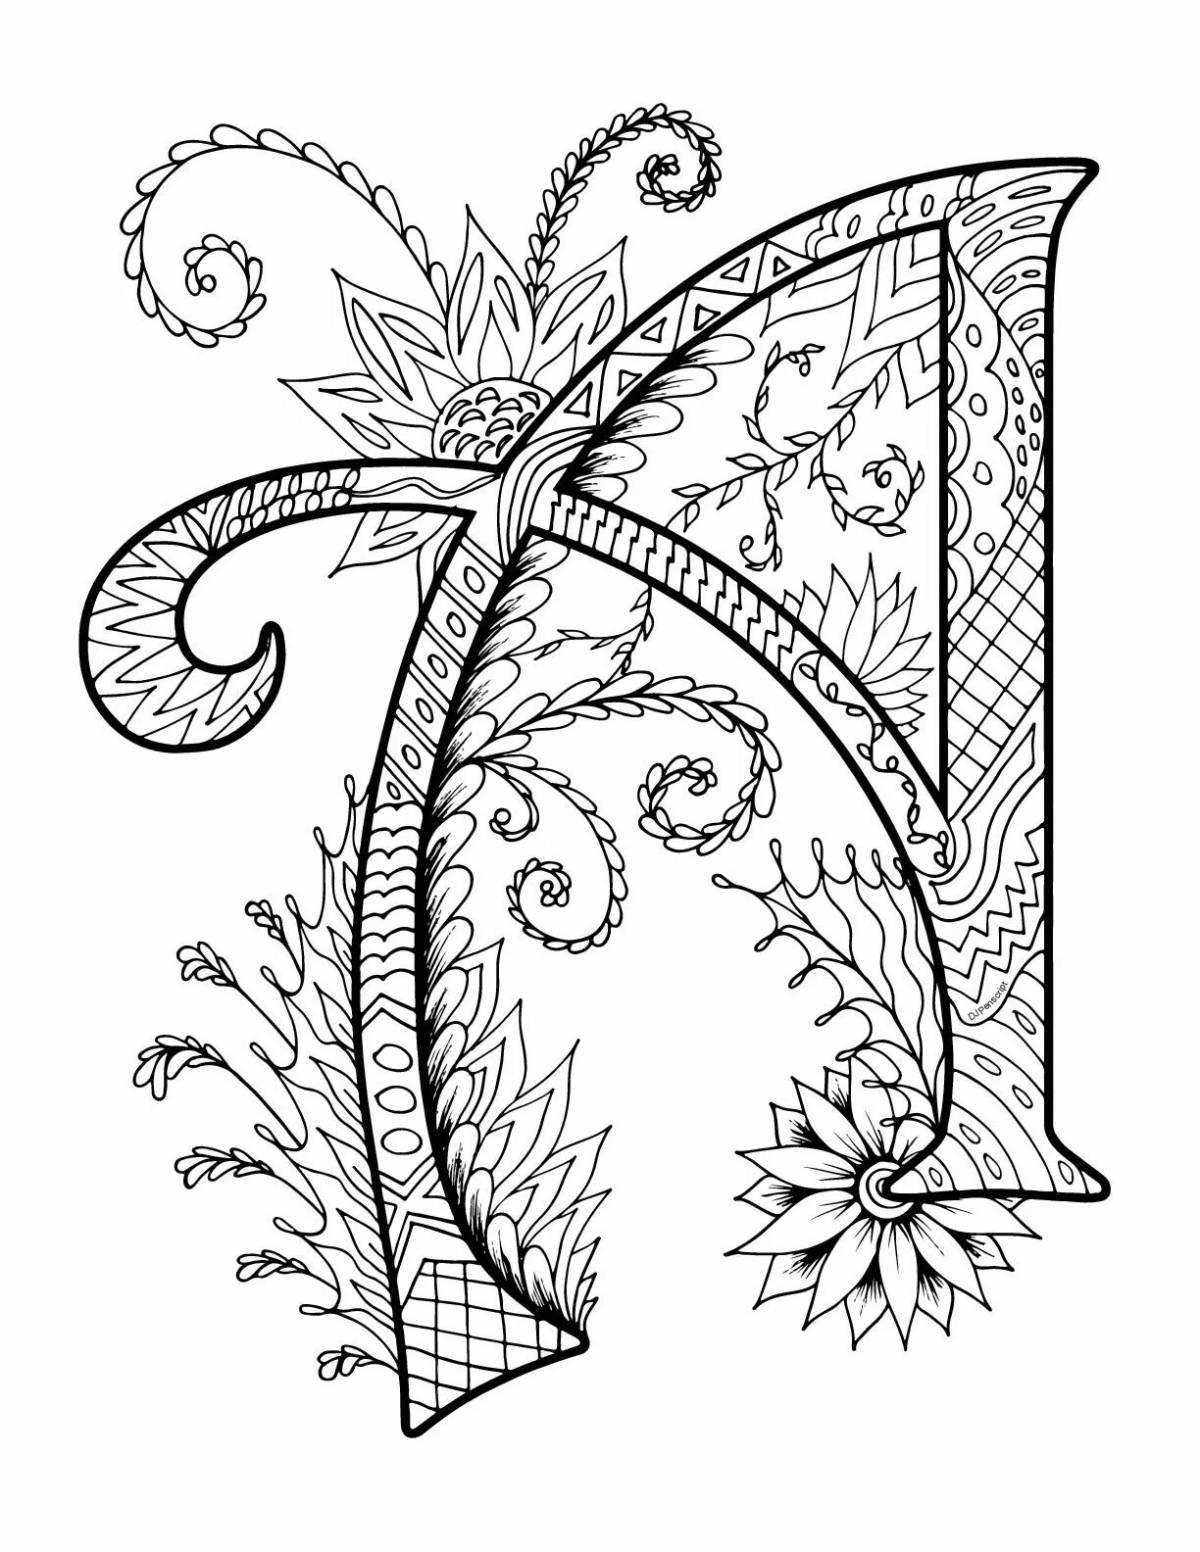 Radiant coloring page antistress alphabet